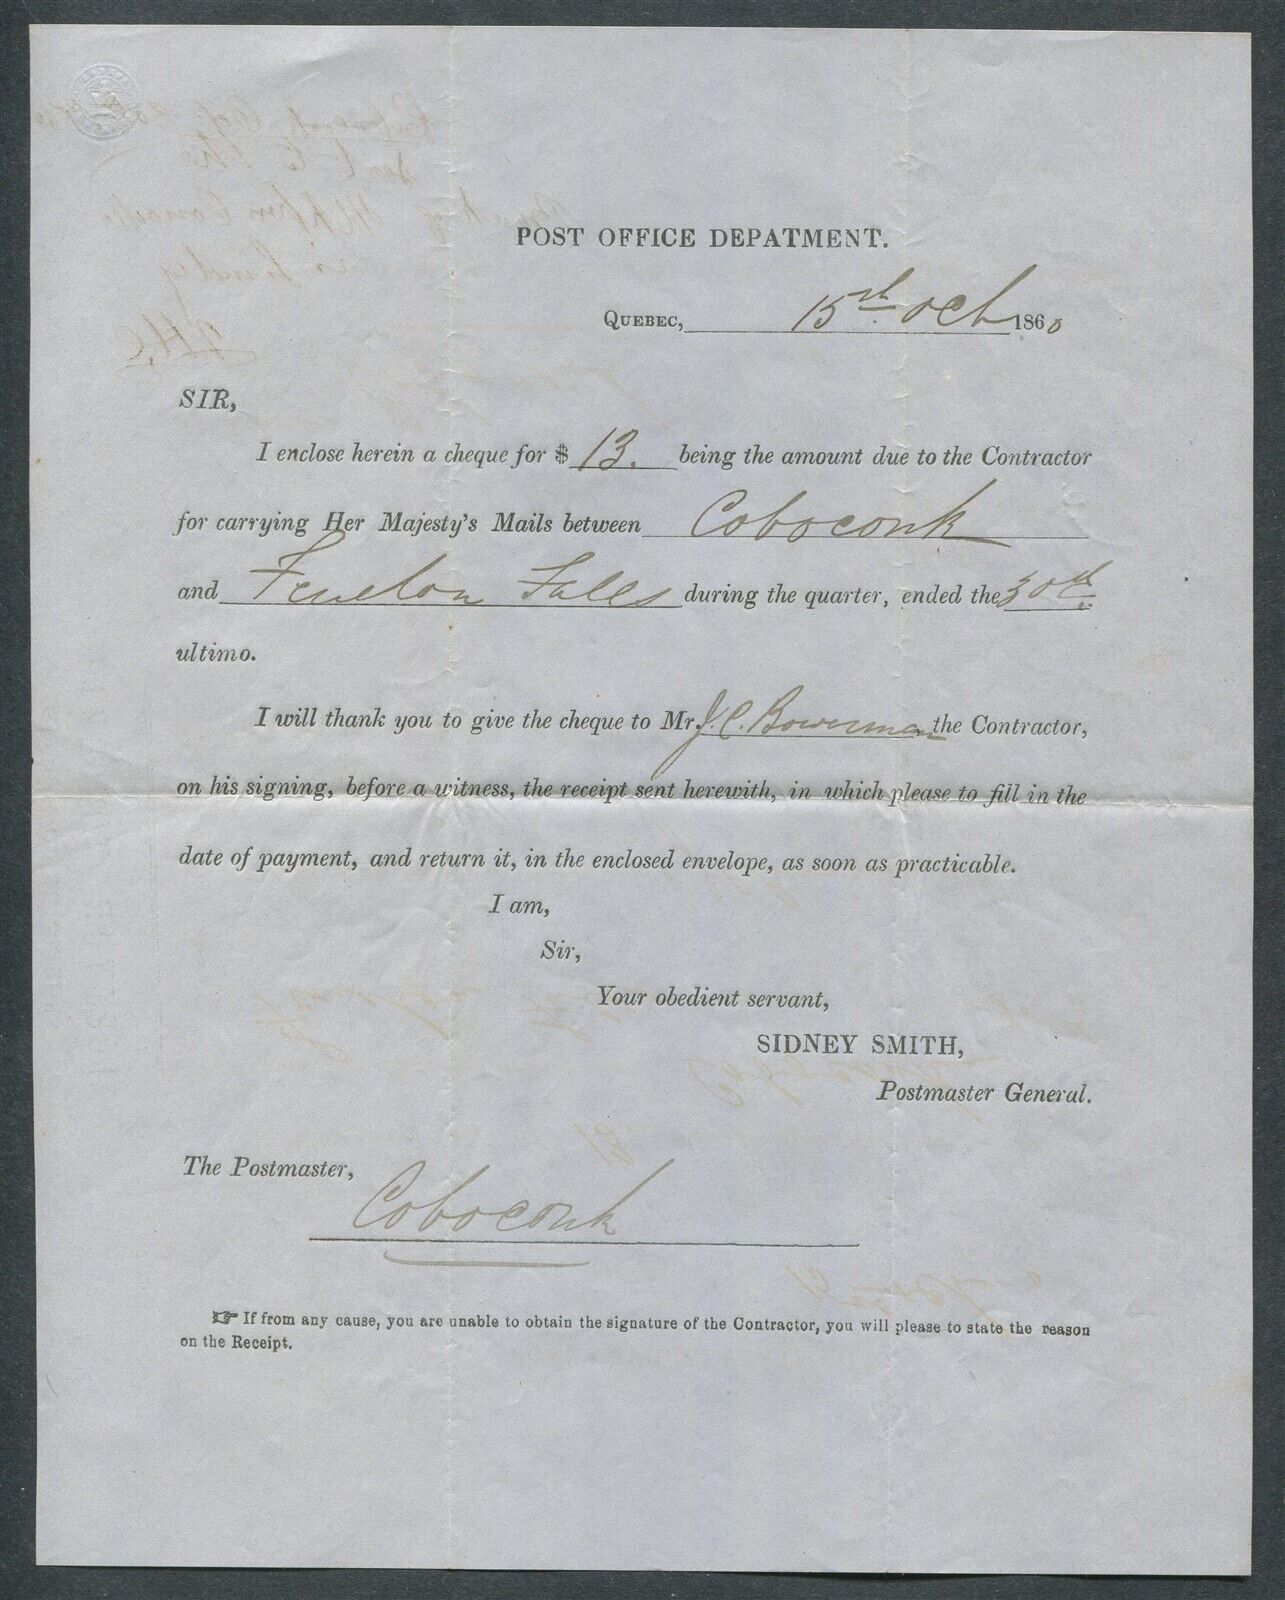 EARLY CANADIAN HISTORICAL DOCUMENT - POST OFFICE DEPARTMENT LETTER